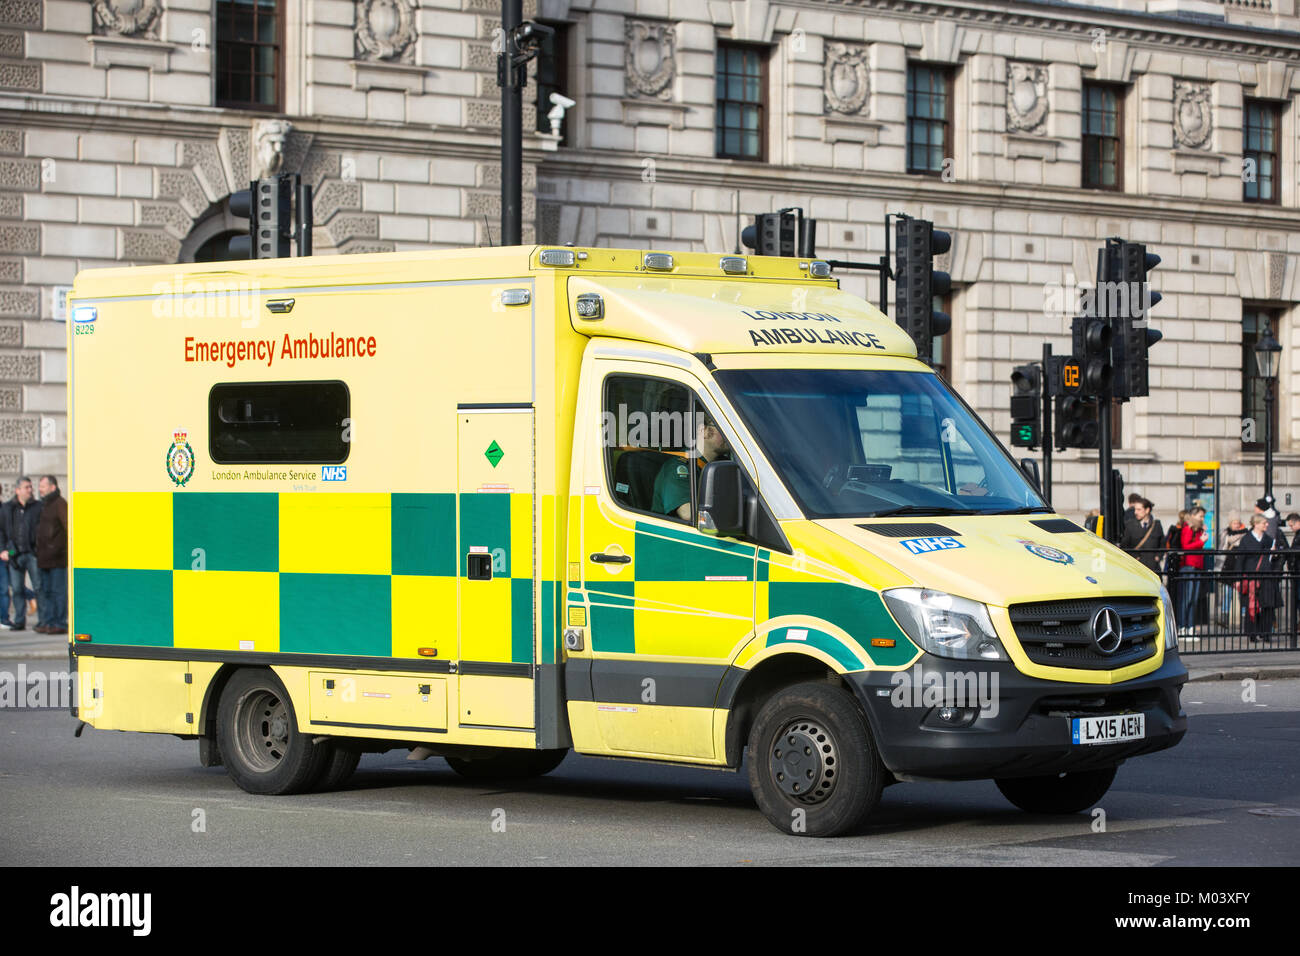 London, UK. 18th Jan, 2018. A Mercedes-Benz Sprinter 519 CDI ambulance responds to an emergency call in Parliament Square. It was today announced that more than 100,000 NHS patients this winter waited in an ambulance for at least 30 minutes due to A&E overcrowding. Credit: Mark Kerrison/Alamy Live News Stock Photo